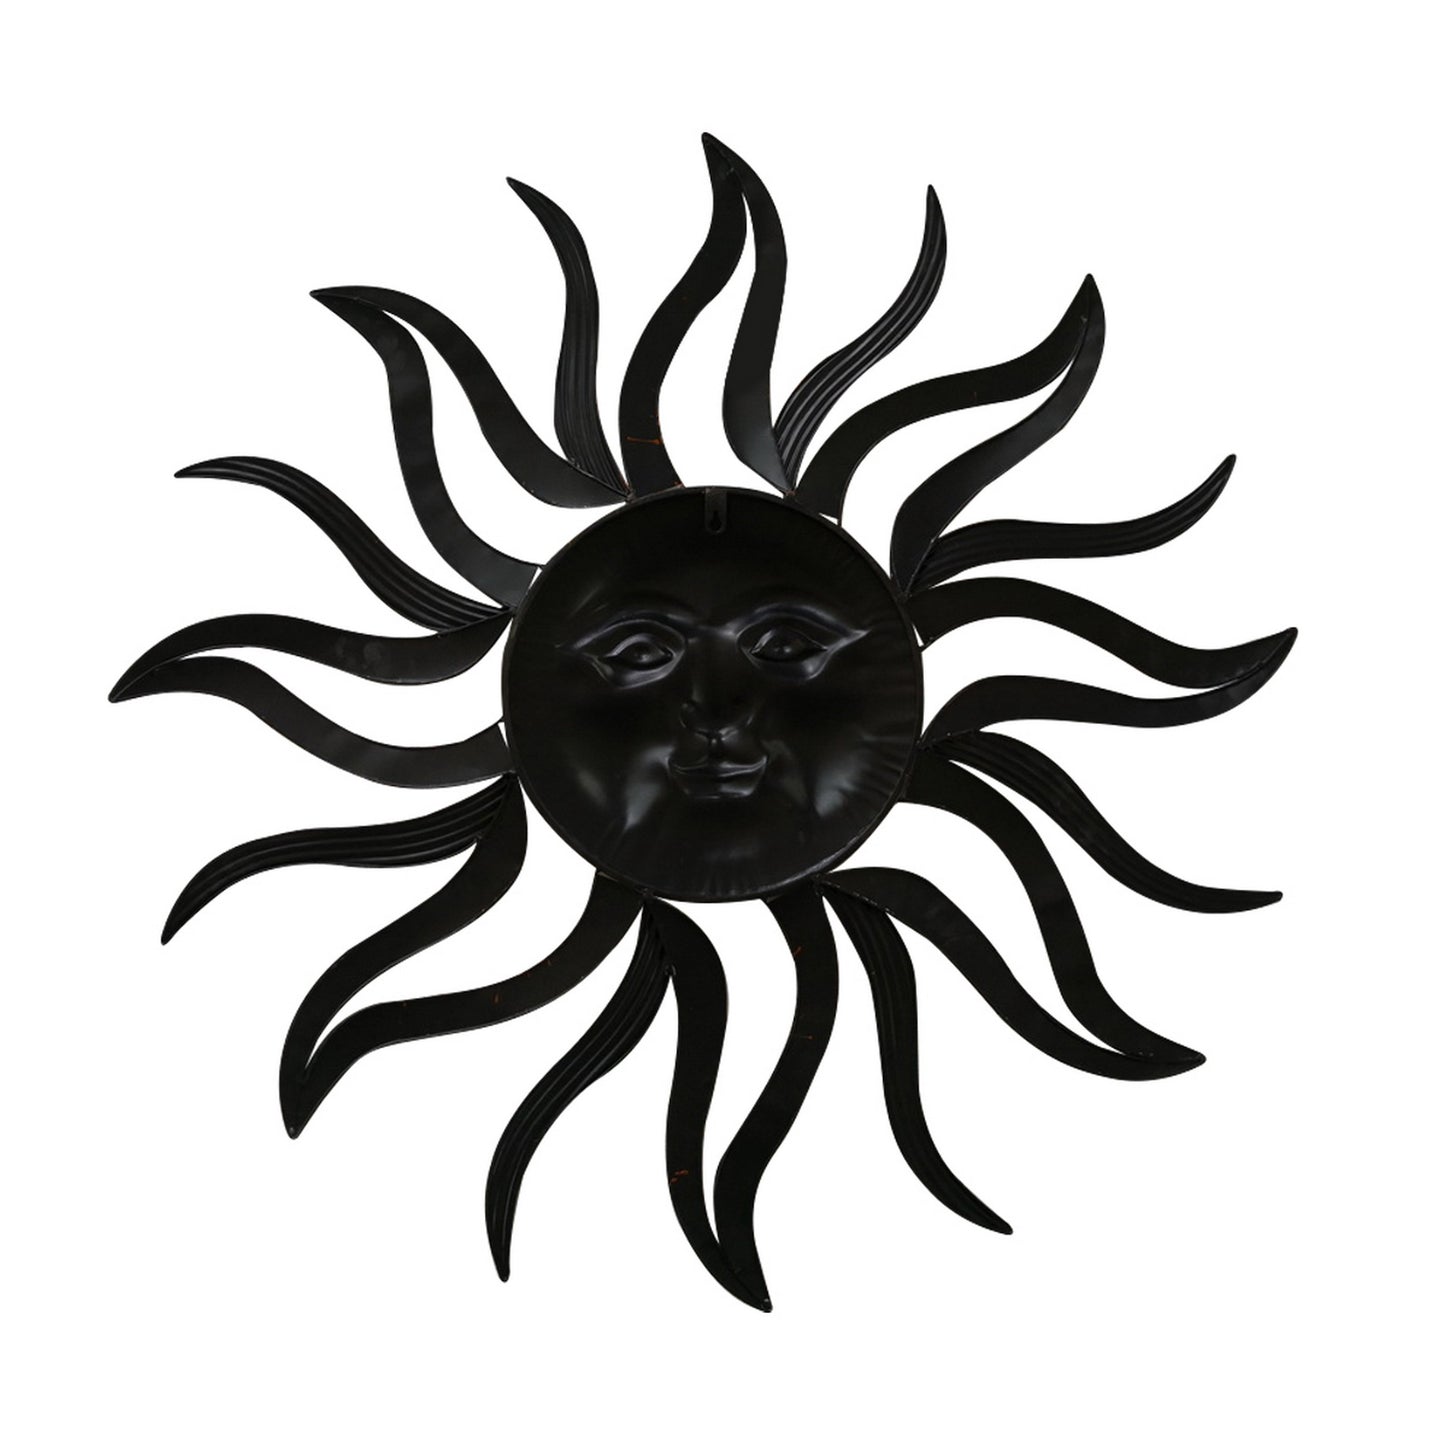 35 Inch Round Wall Mounted Sun Face Accent Decor, Carved Rustic Gold and Black Metal The Urban Port